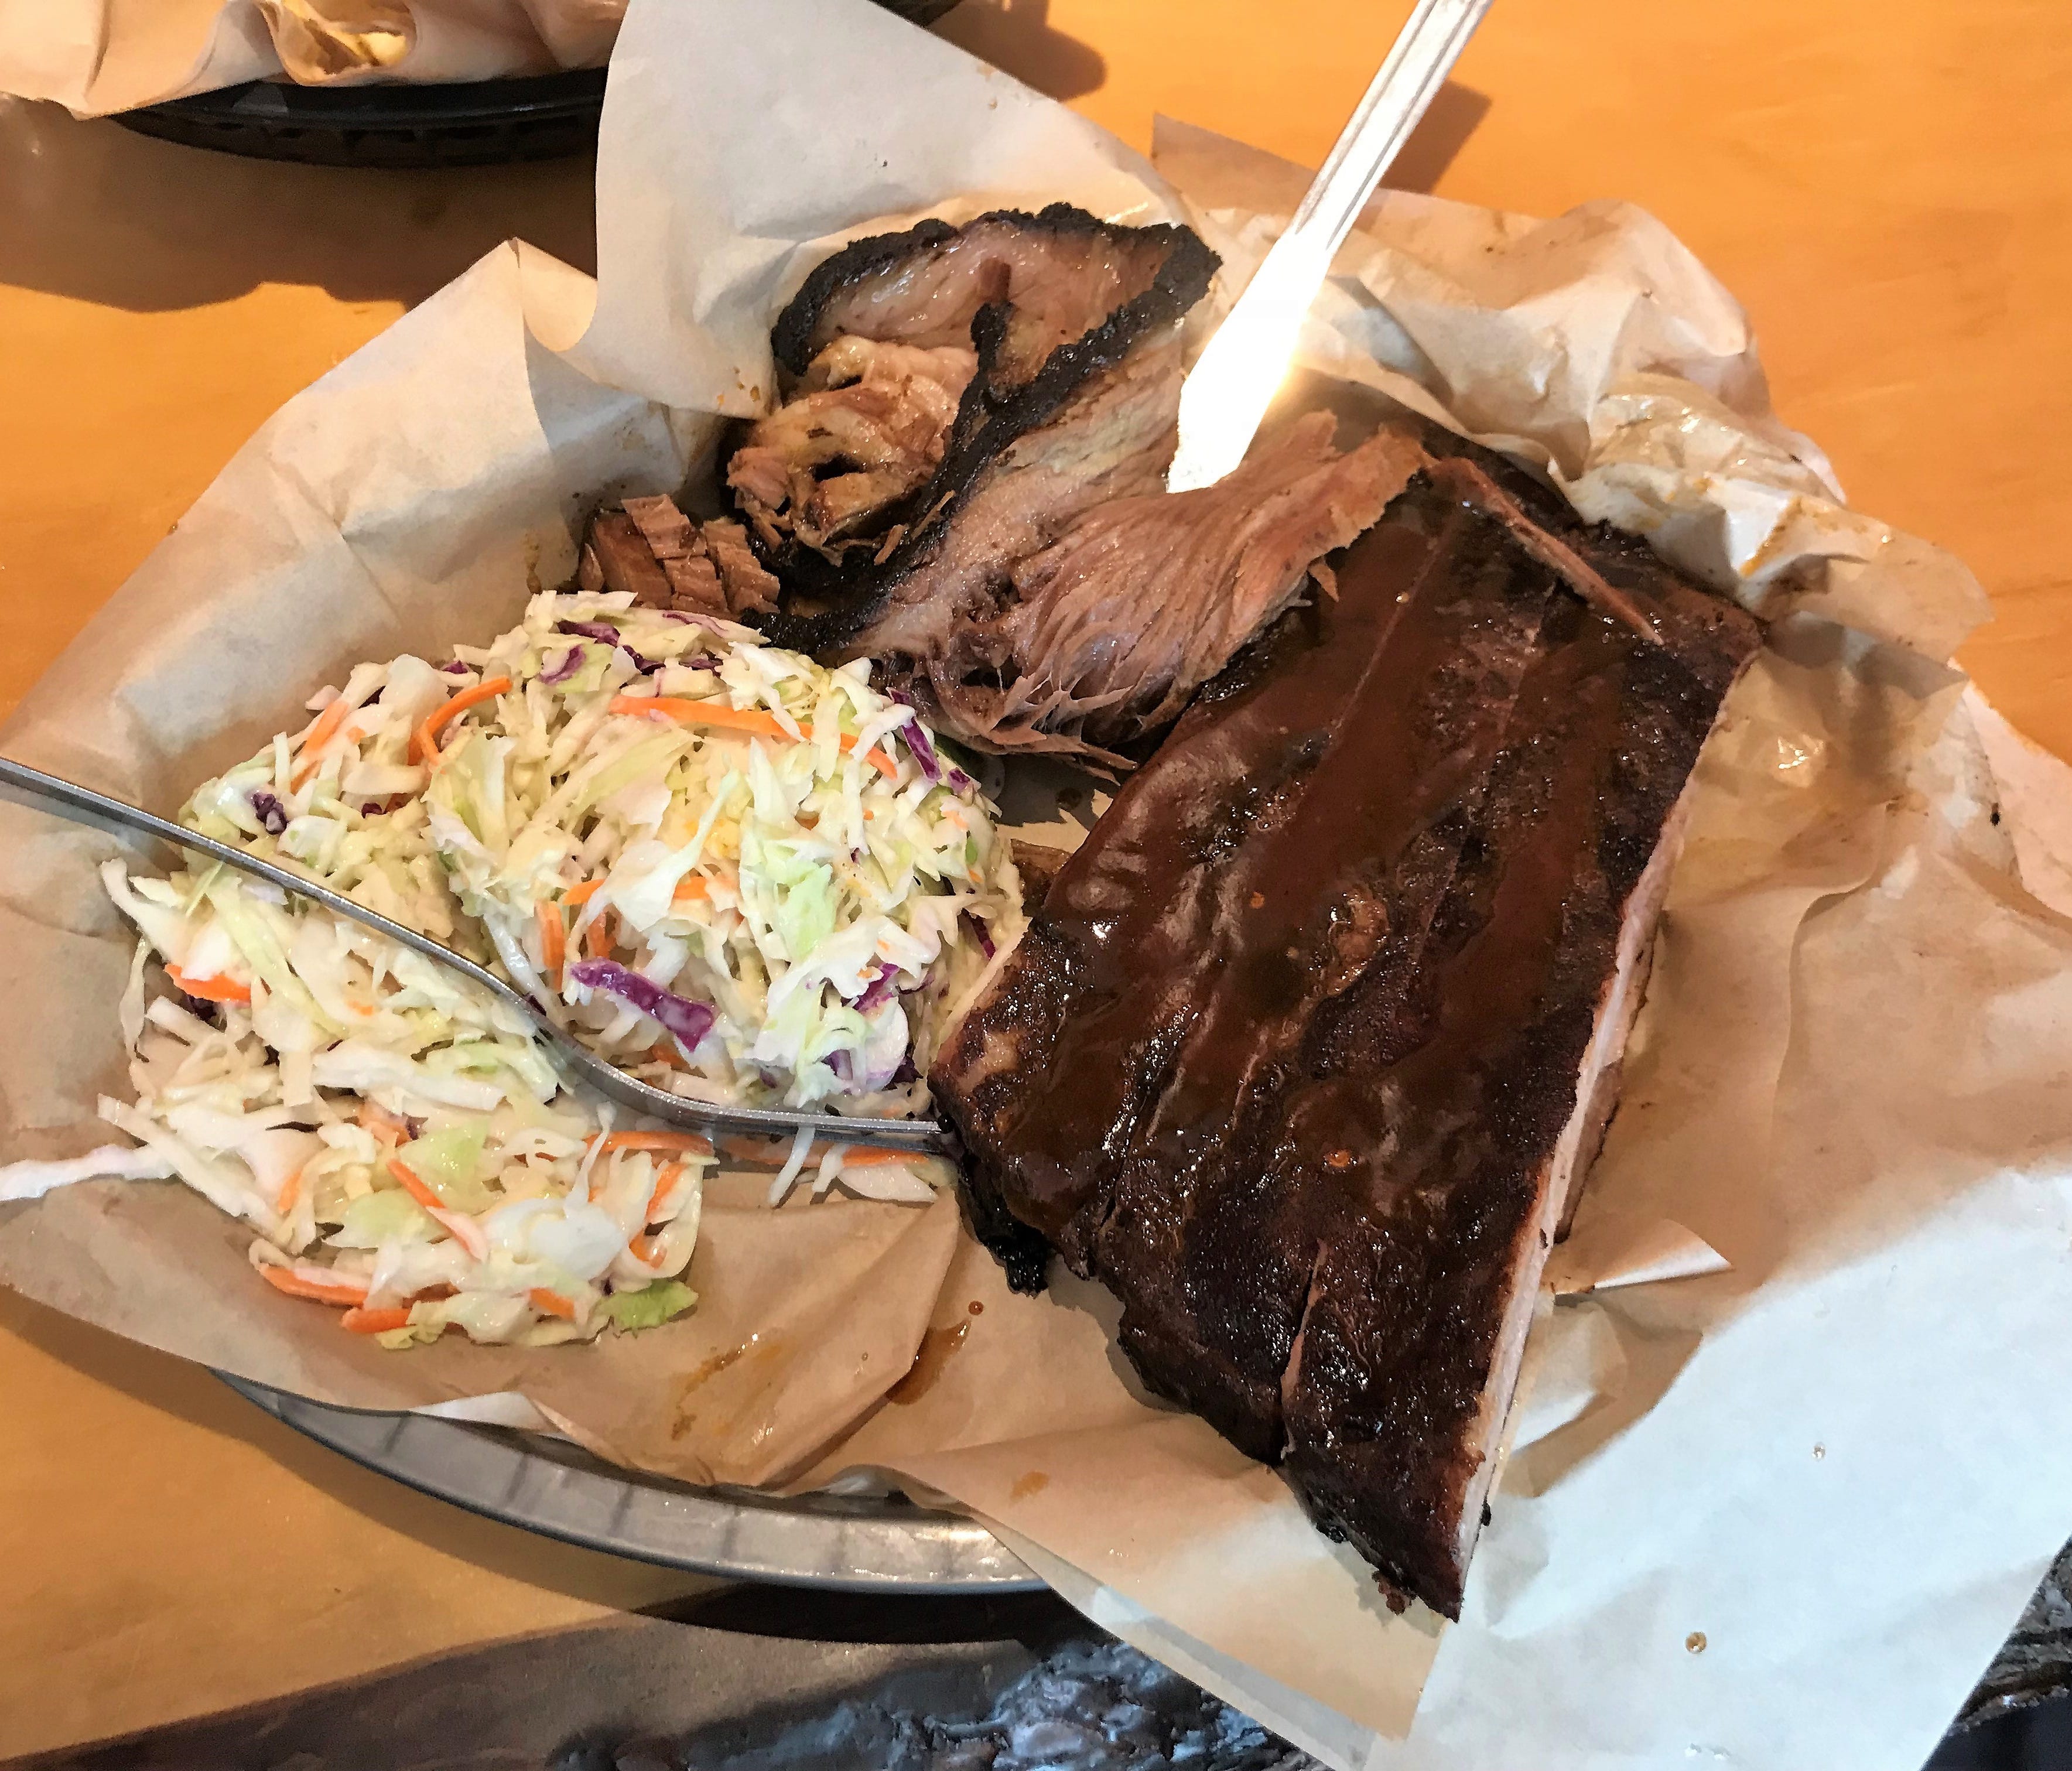 All of the barbecue meats are offered as two-option combo plates with cole slaw – this is quarter rack of ribs and 8 ounces of beef brisket.